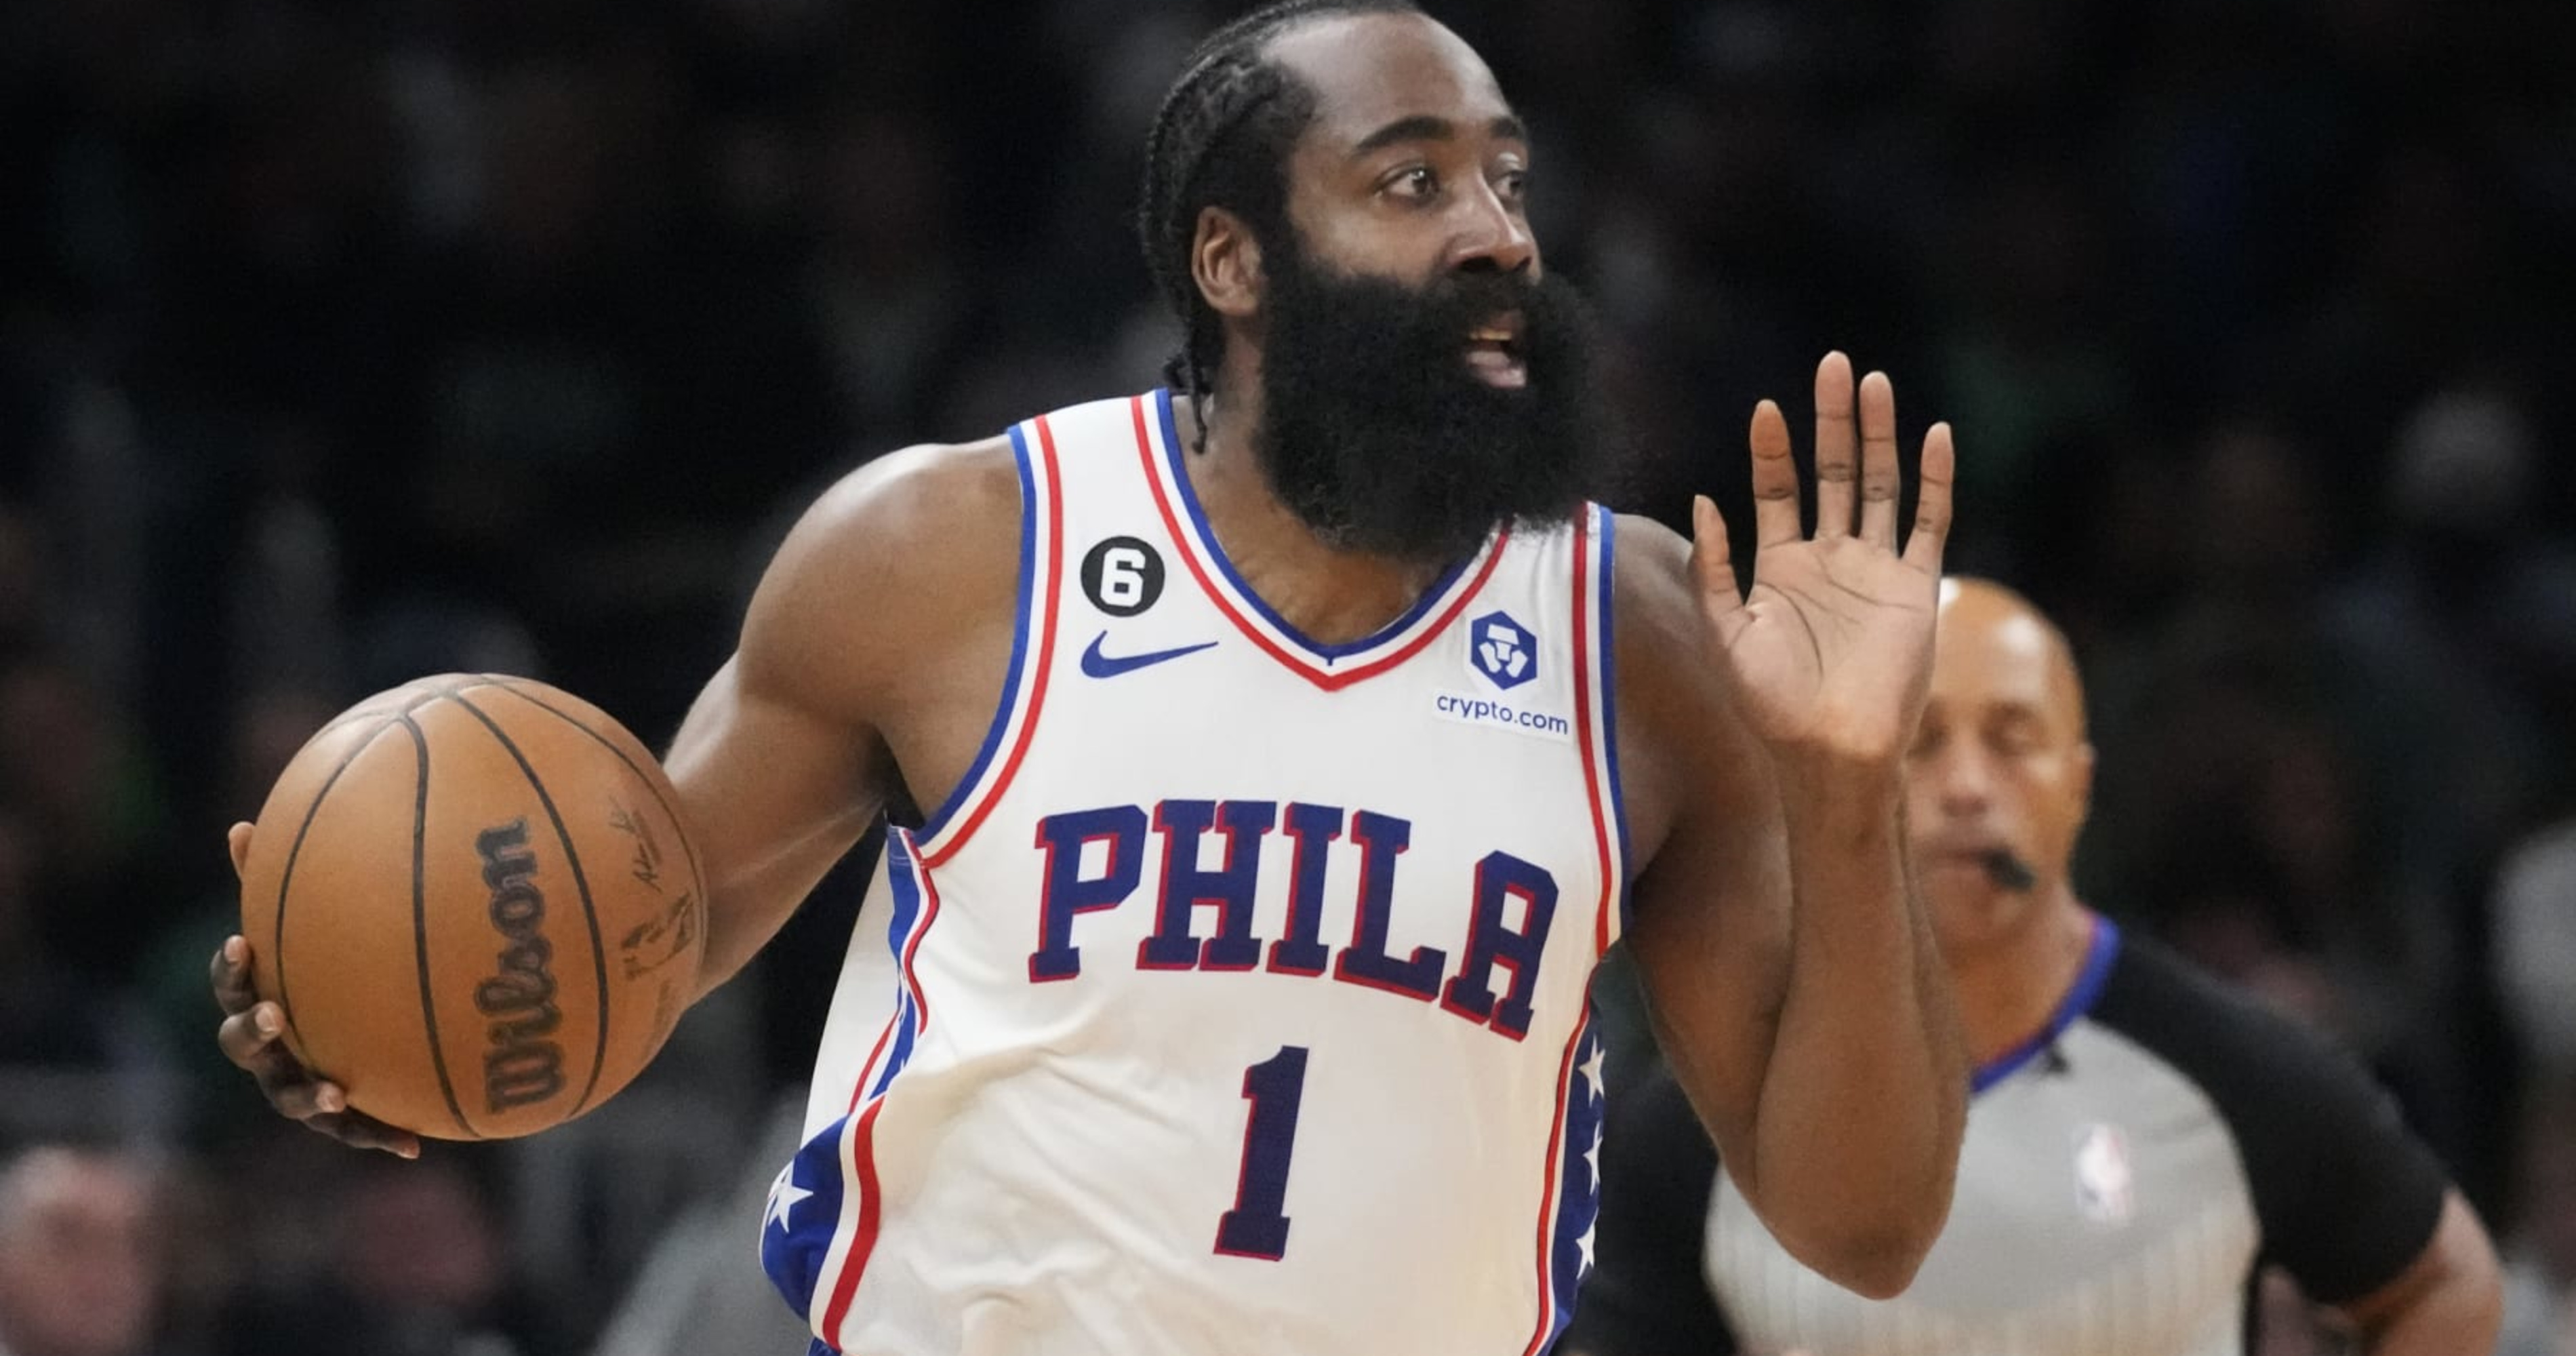 Sixers star James Harden gets absolutely roasted on Twitter over